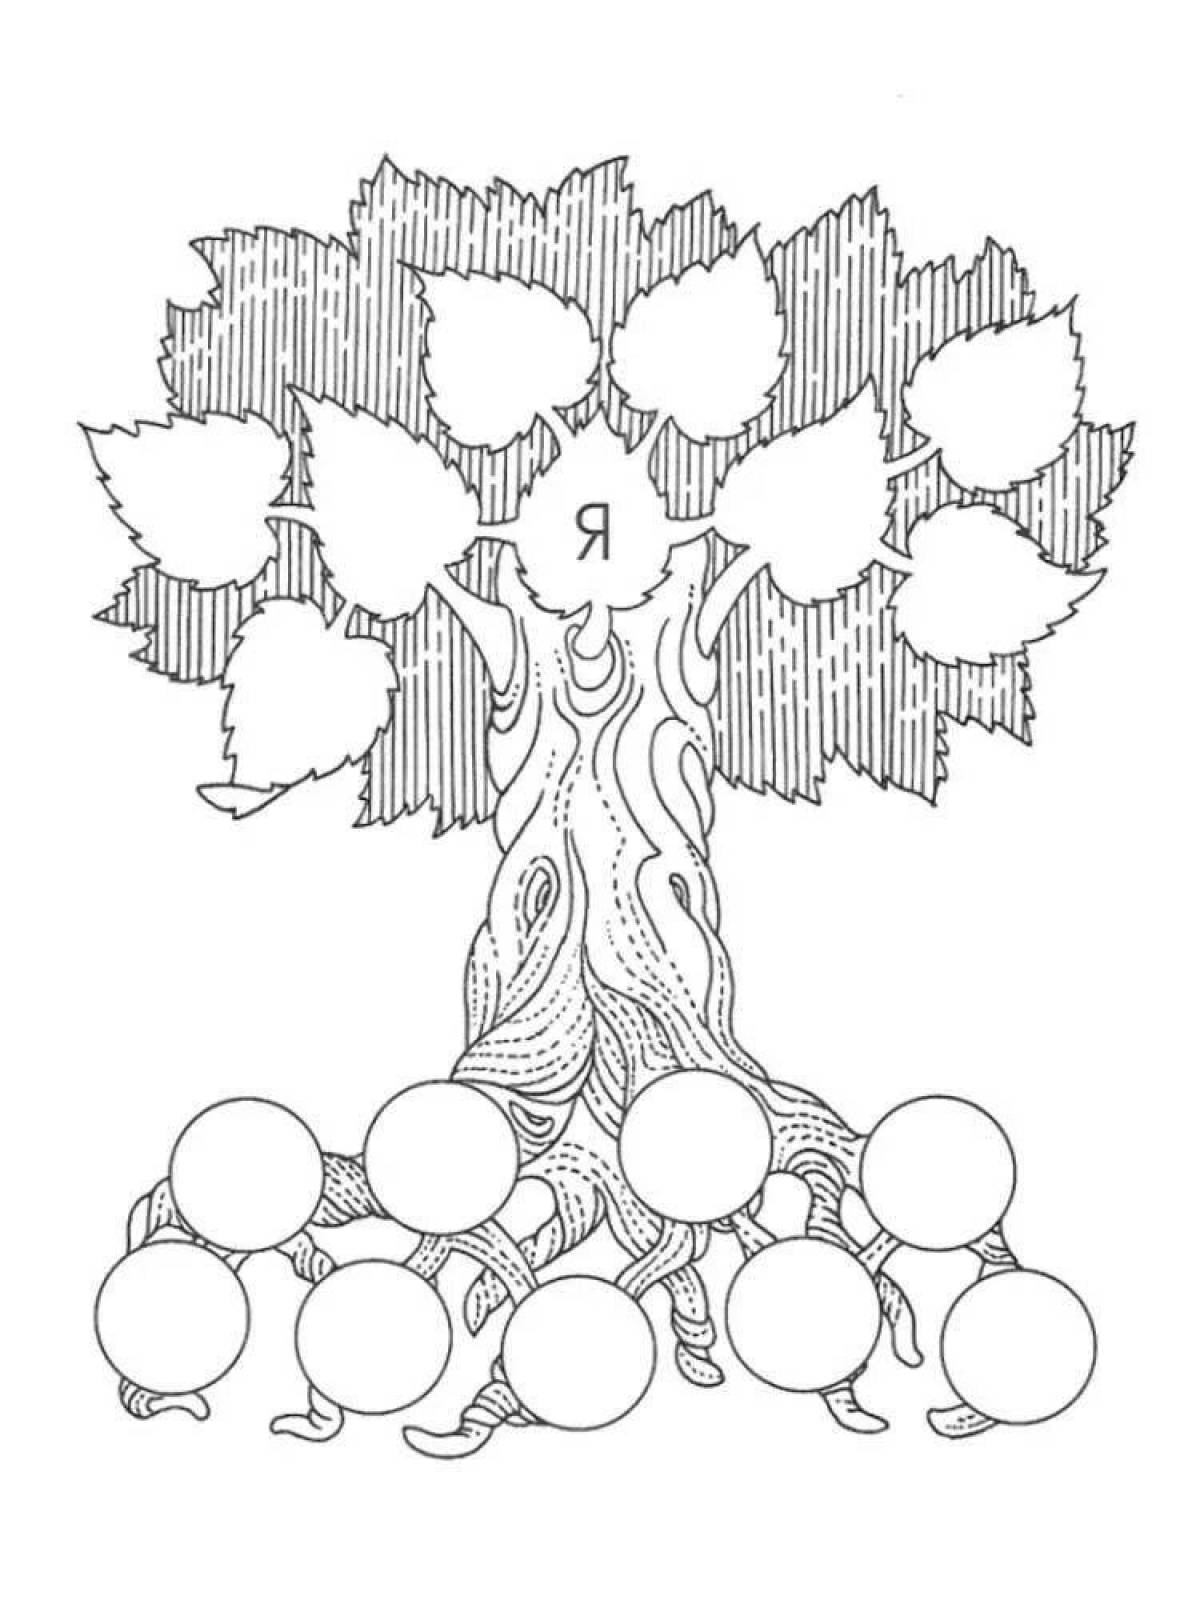 Exciting family tree coloring book